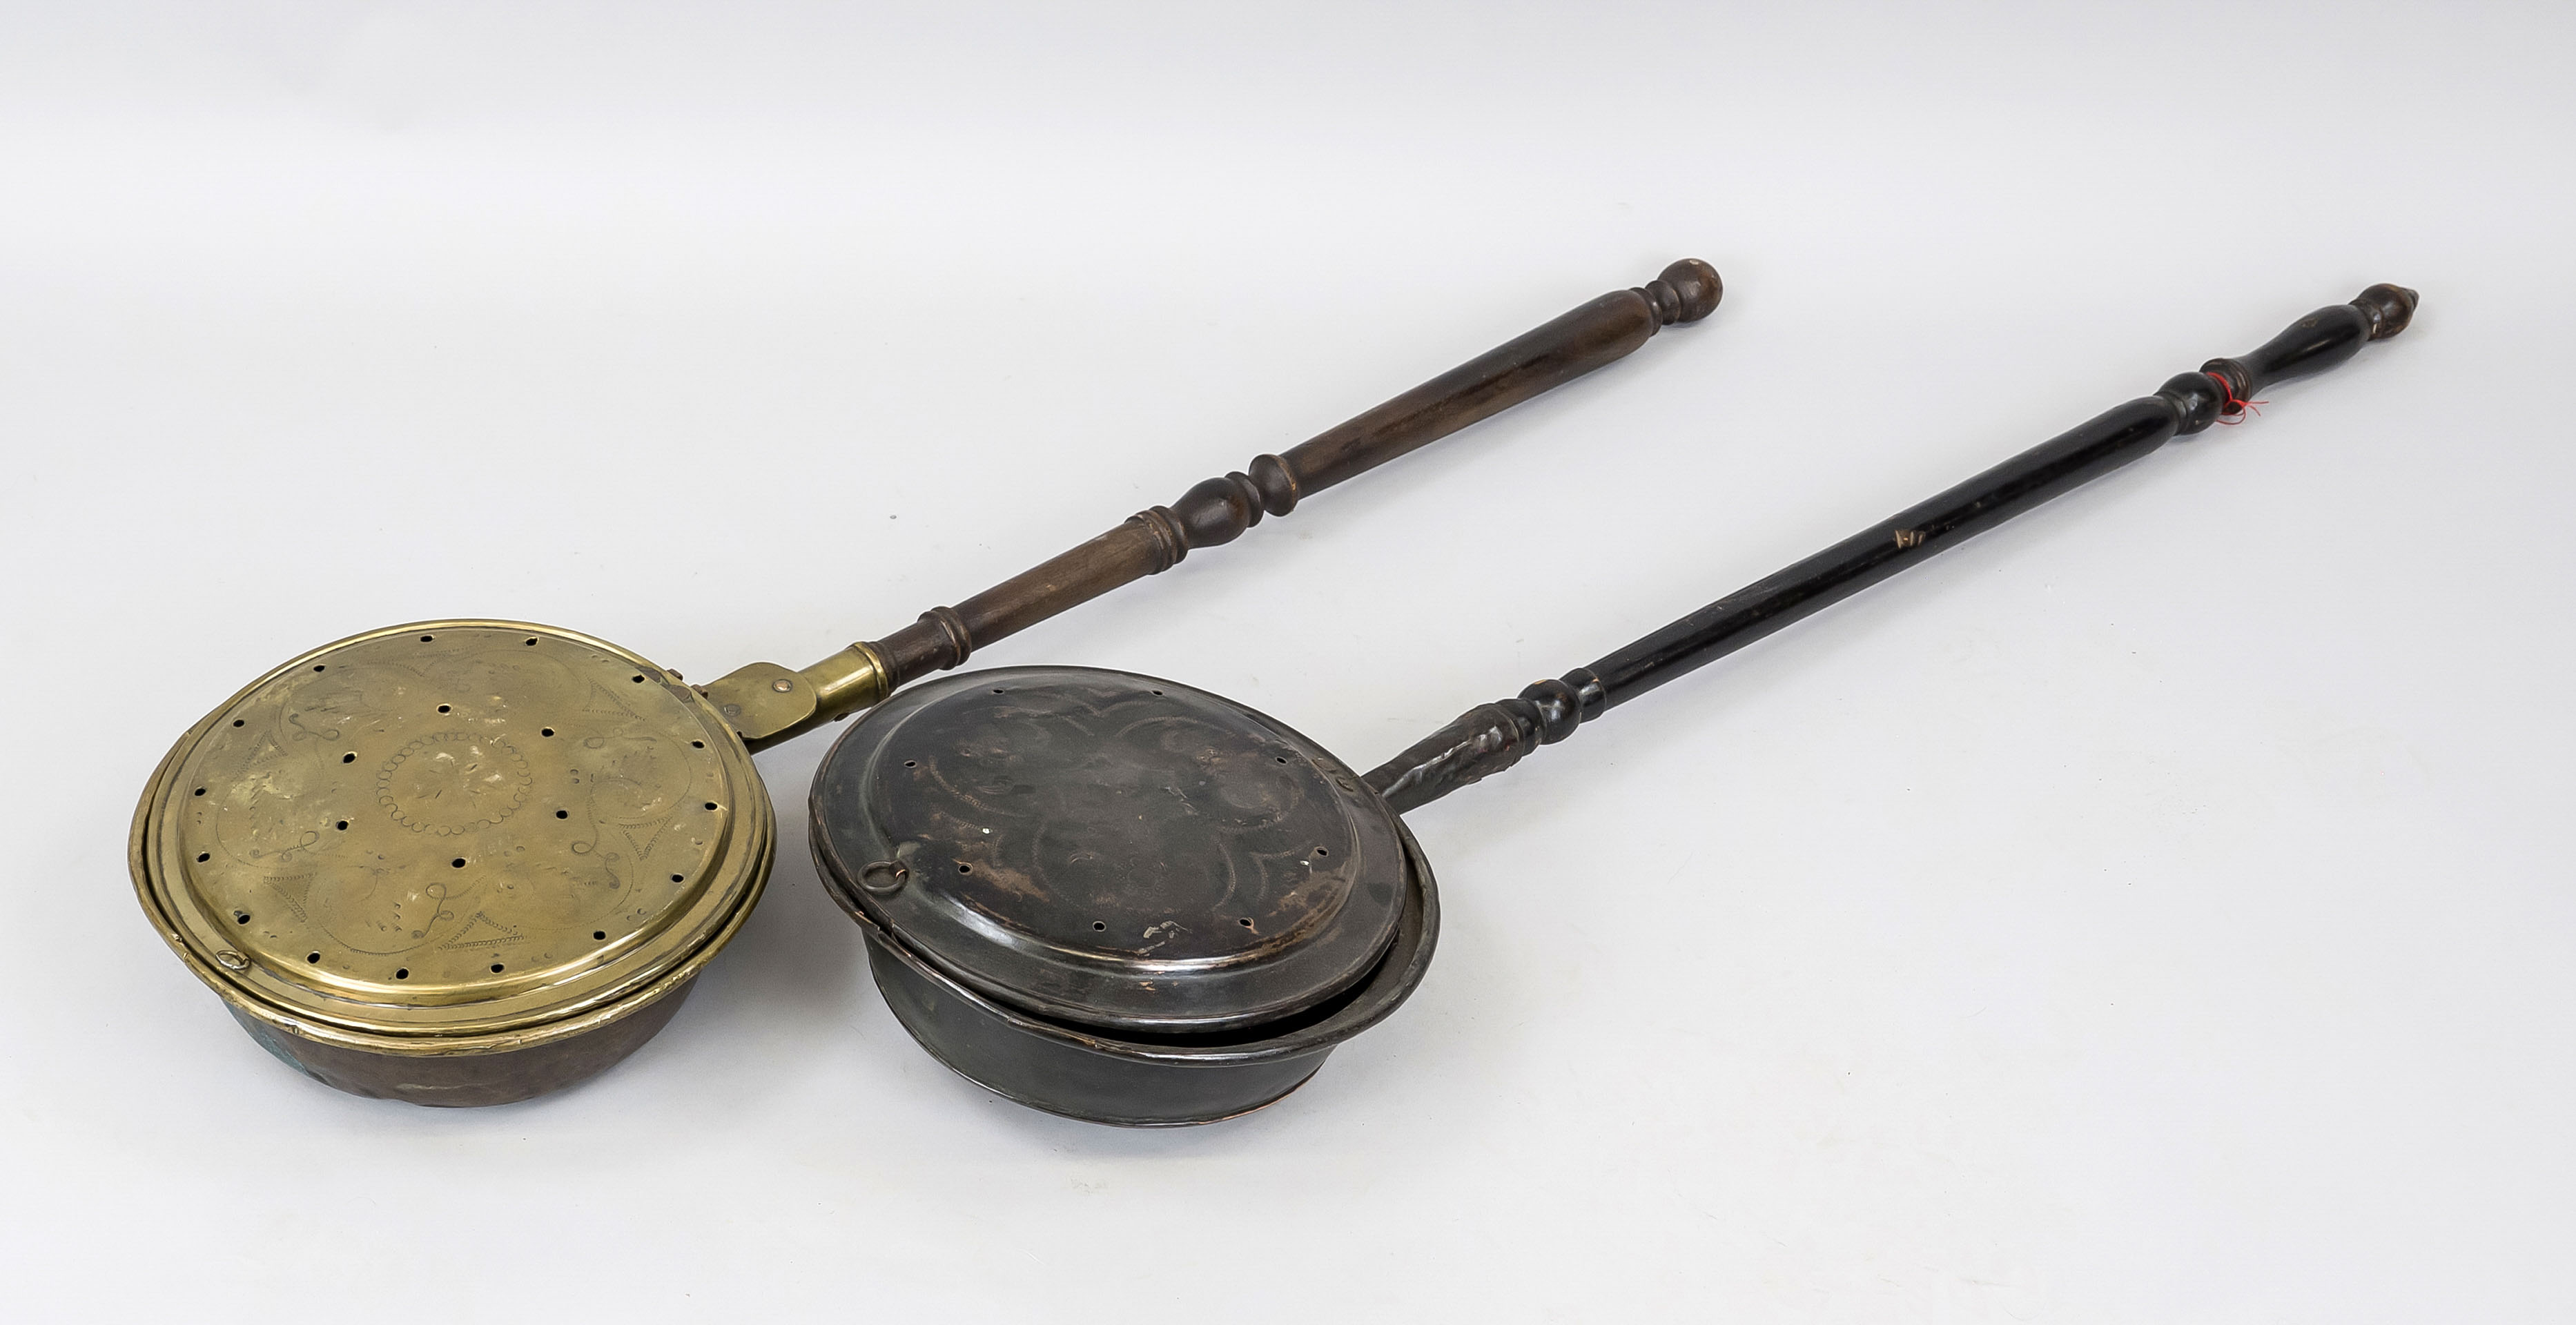 2 bedpans, 19th century, turned wooden shafts, pans with hinged lids with engraved brass and